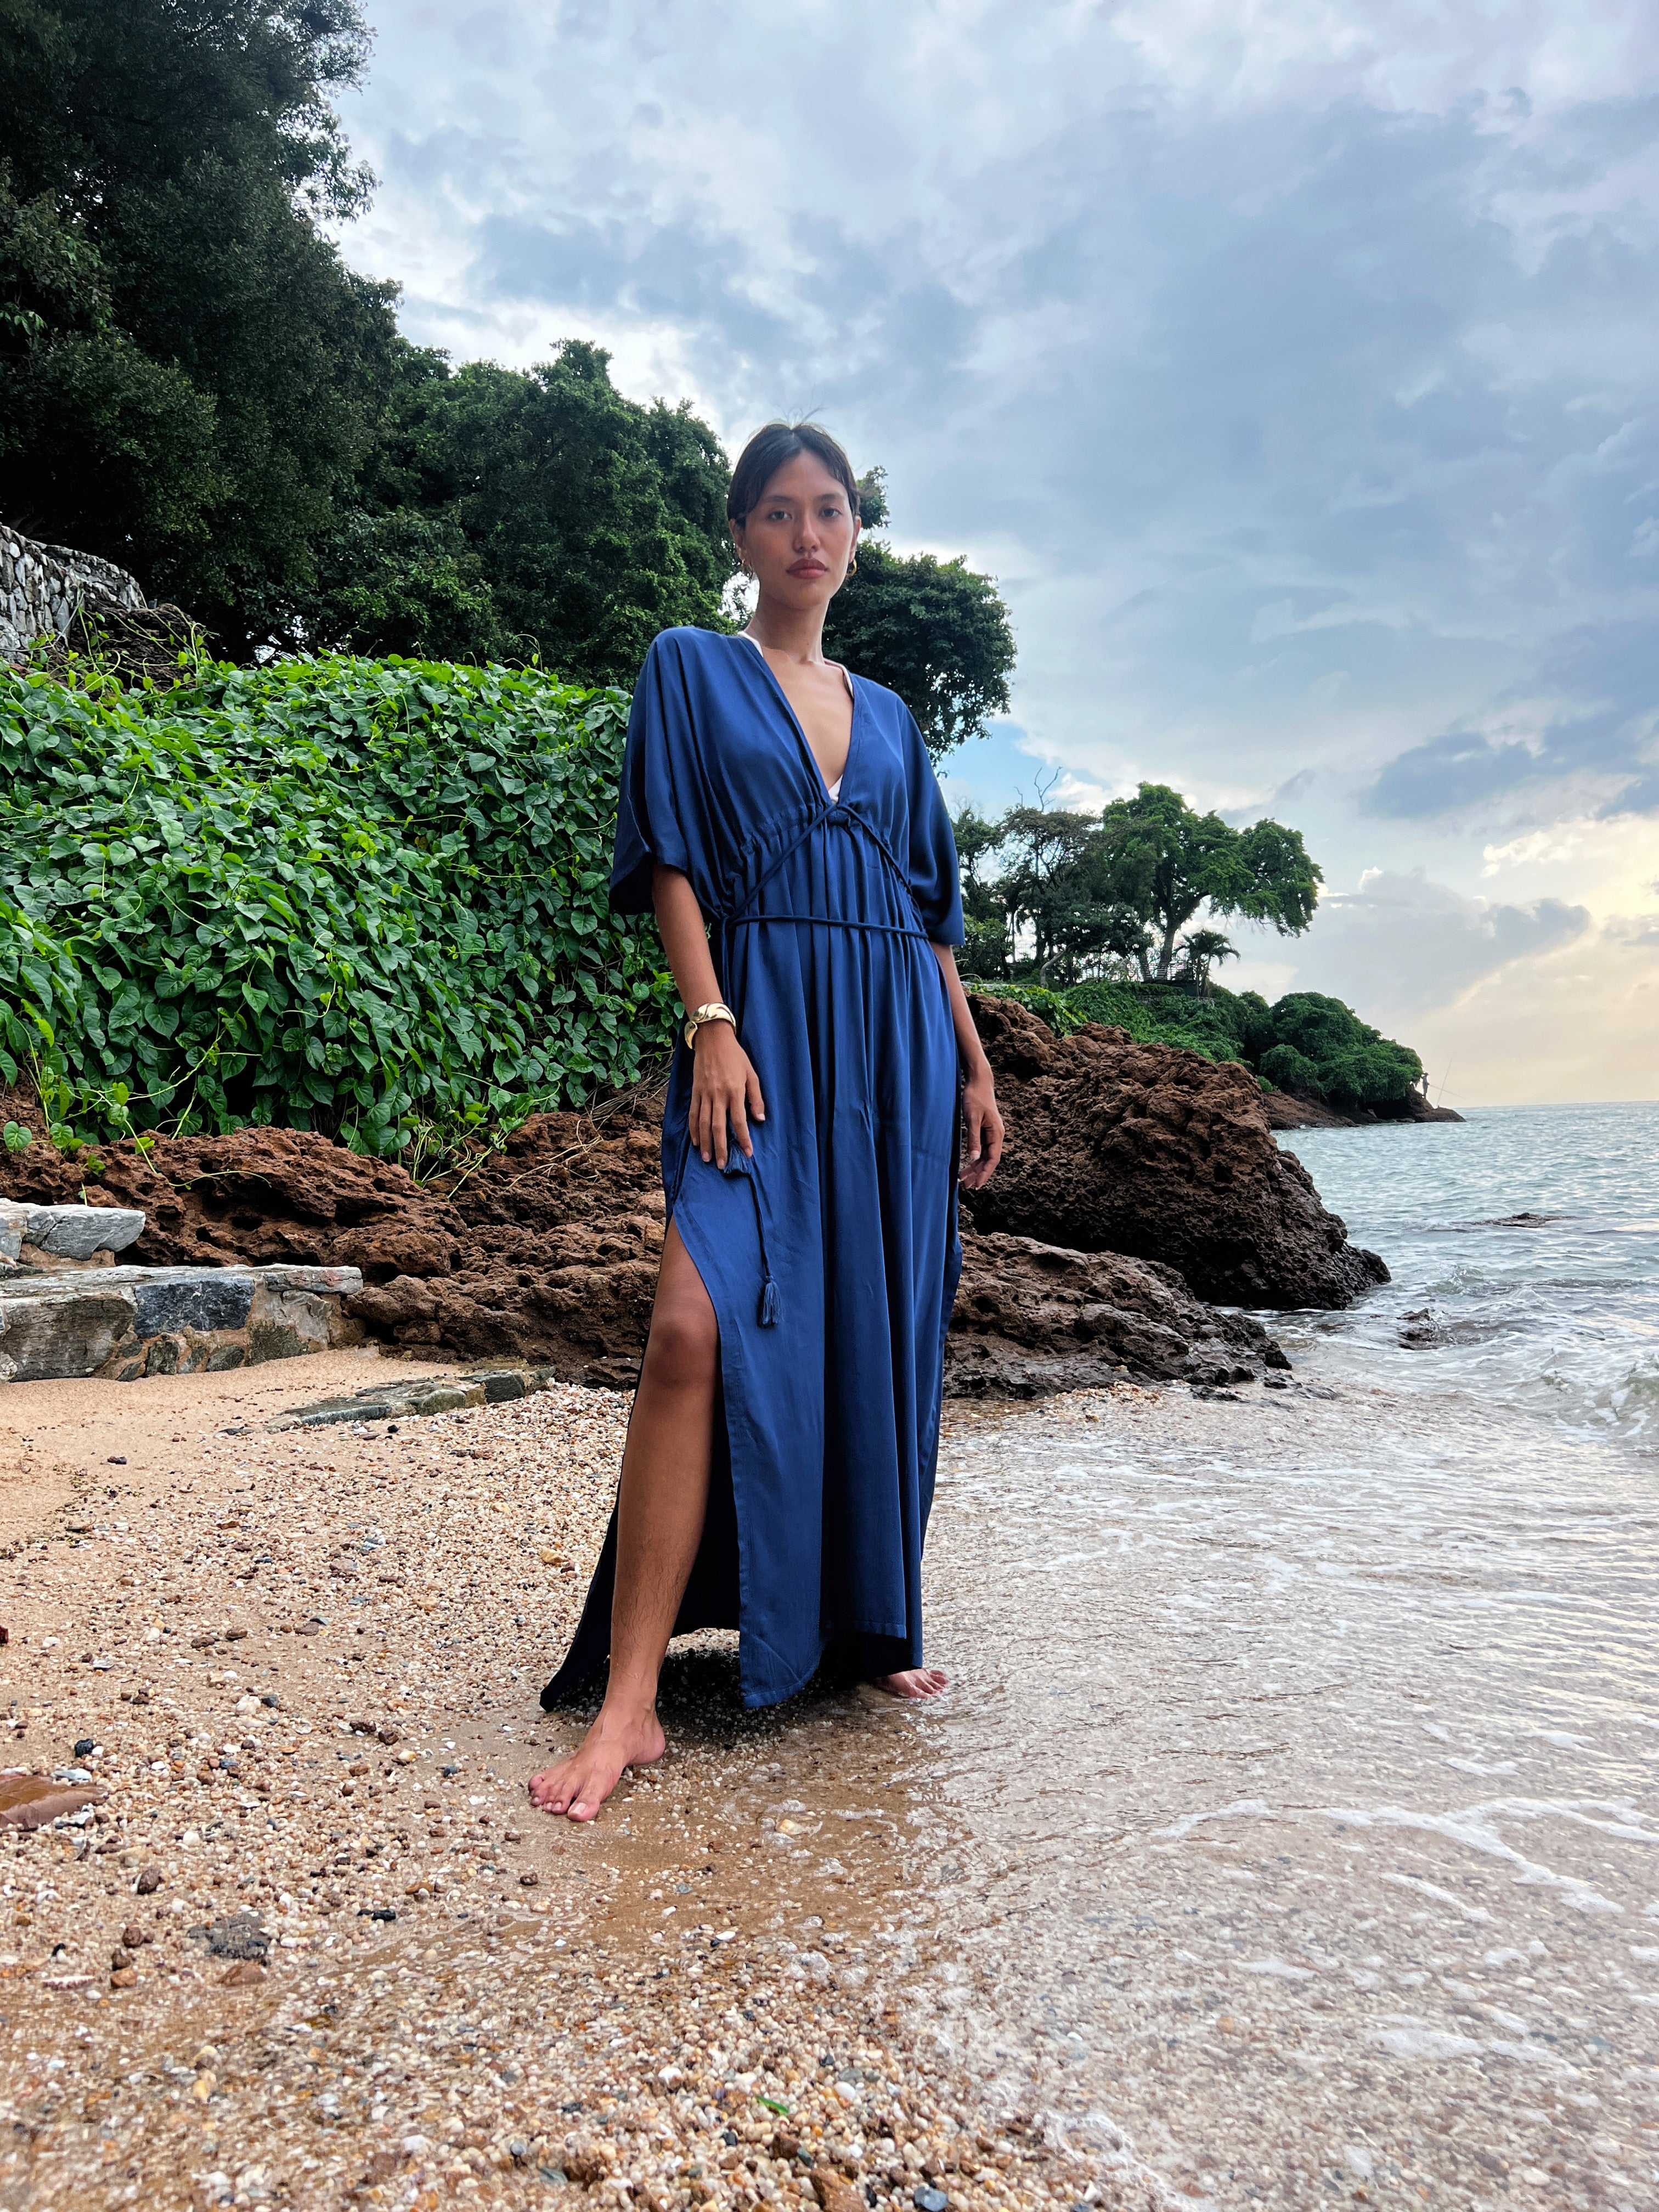 Shop comfort and elegance with our Goddess Kaftan Maxi Dress. This navy hand-dyed kaftan features a flowy, silky feel and a V-neck, making it the ideal choice for resort wear or vacation wear.